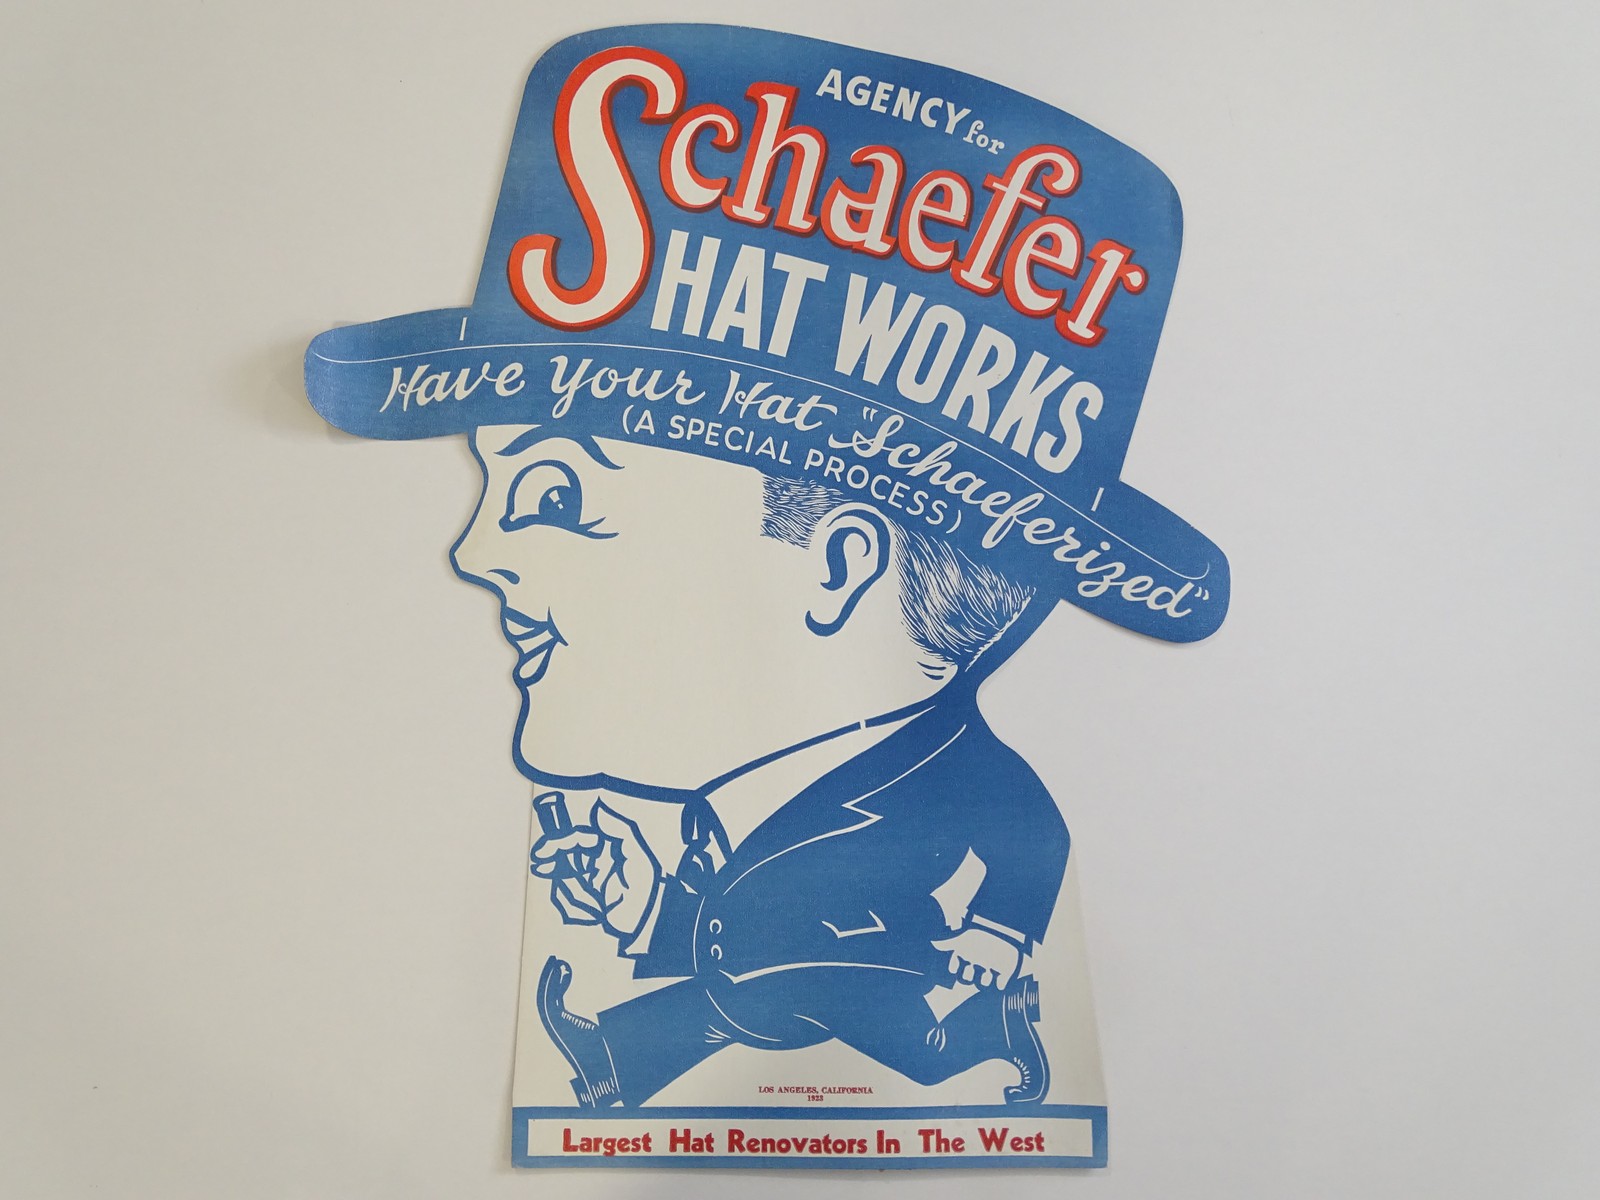 SCHAEFER HAT WORKS (46cm x 56.5cm at widest point) - 'Have your hat 'Schaeferized' USA 1920s